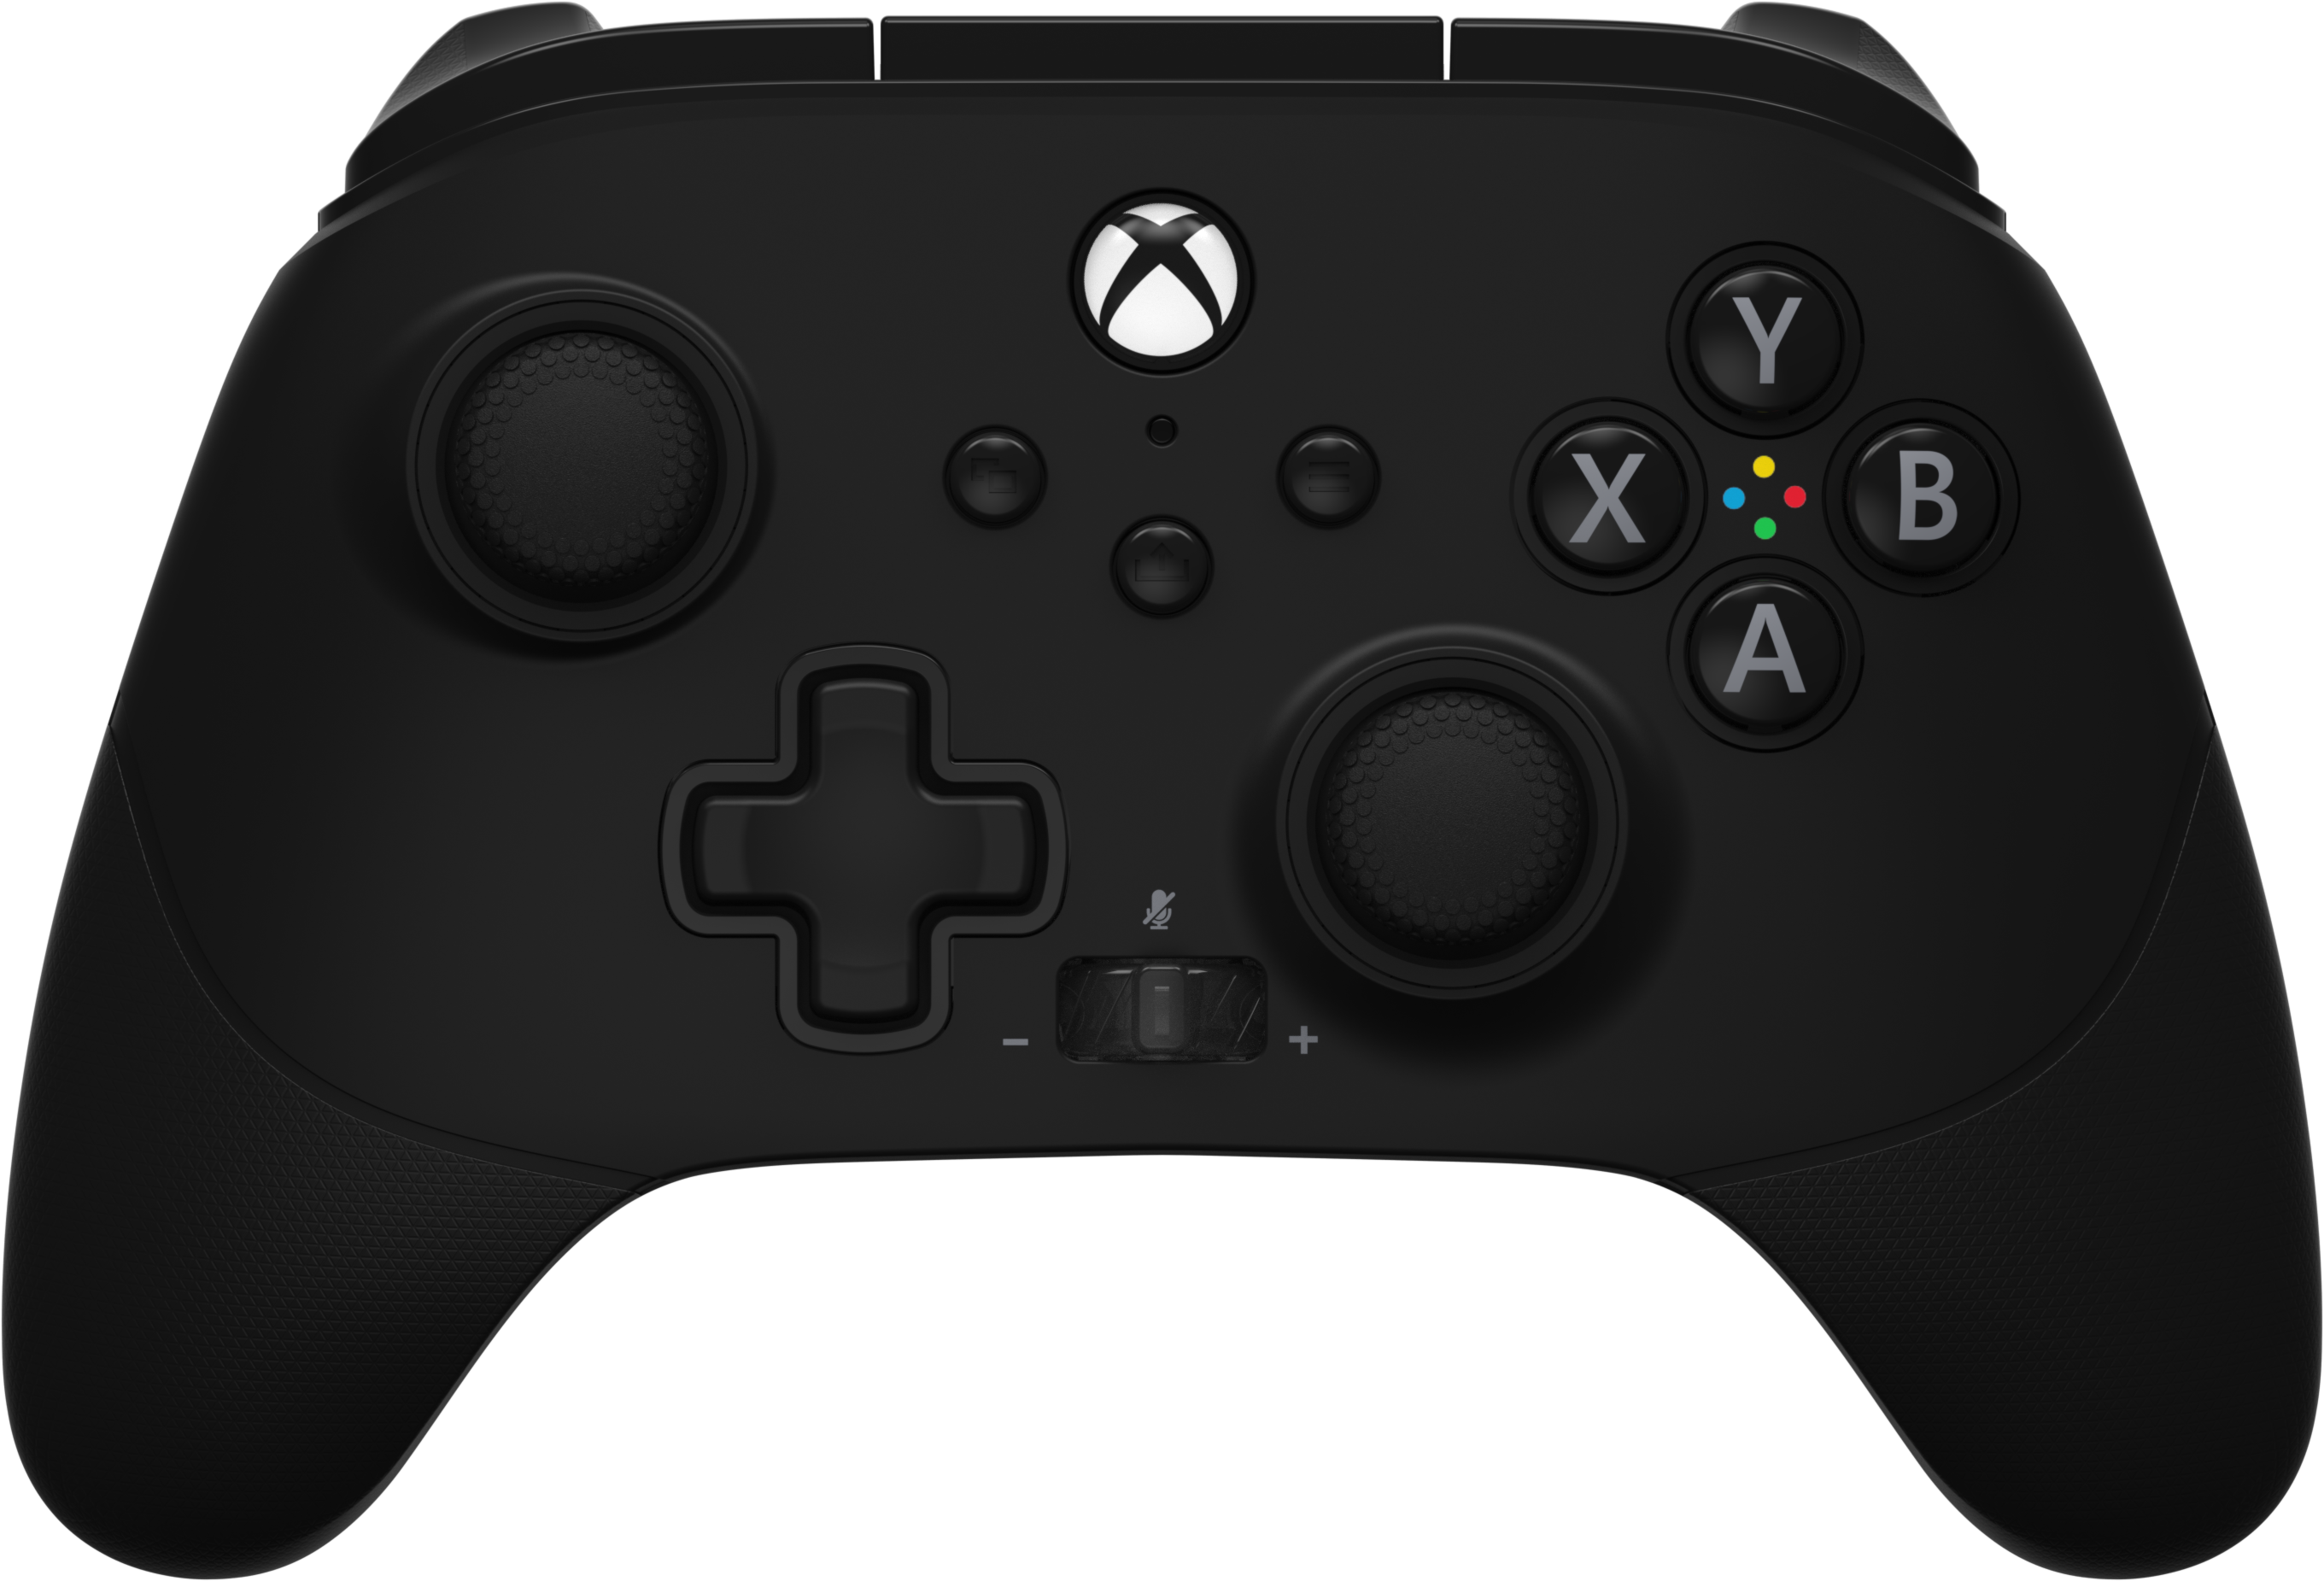 PowerA Fusion Pro 2 review: An Xbox Elite controller for less